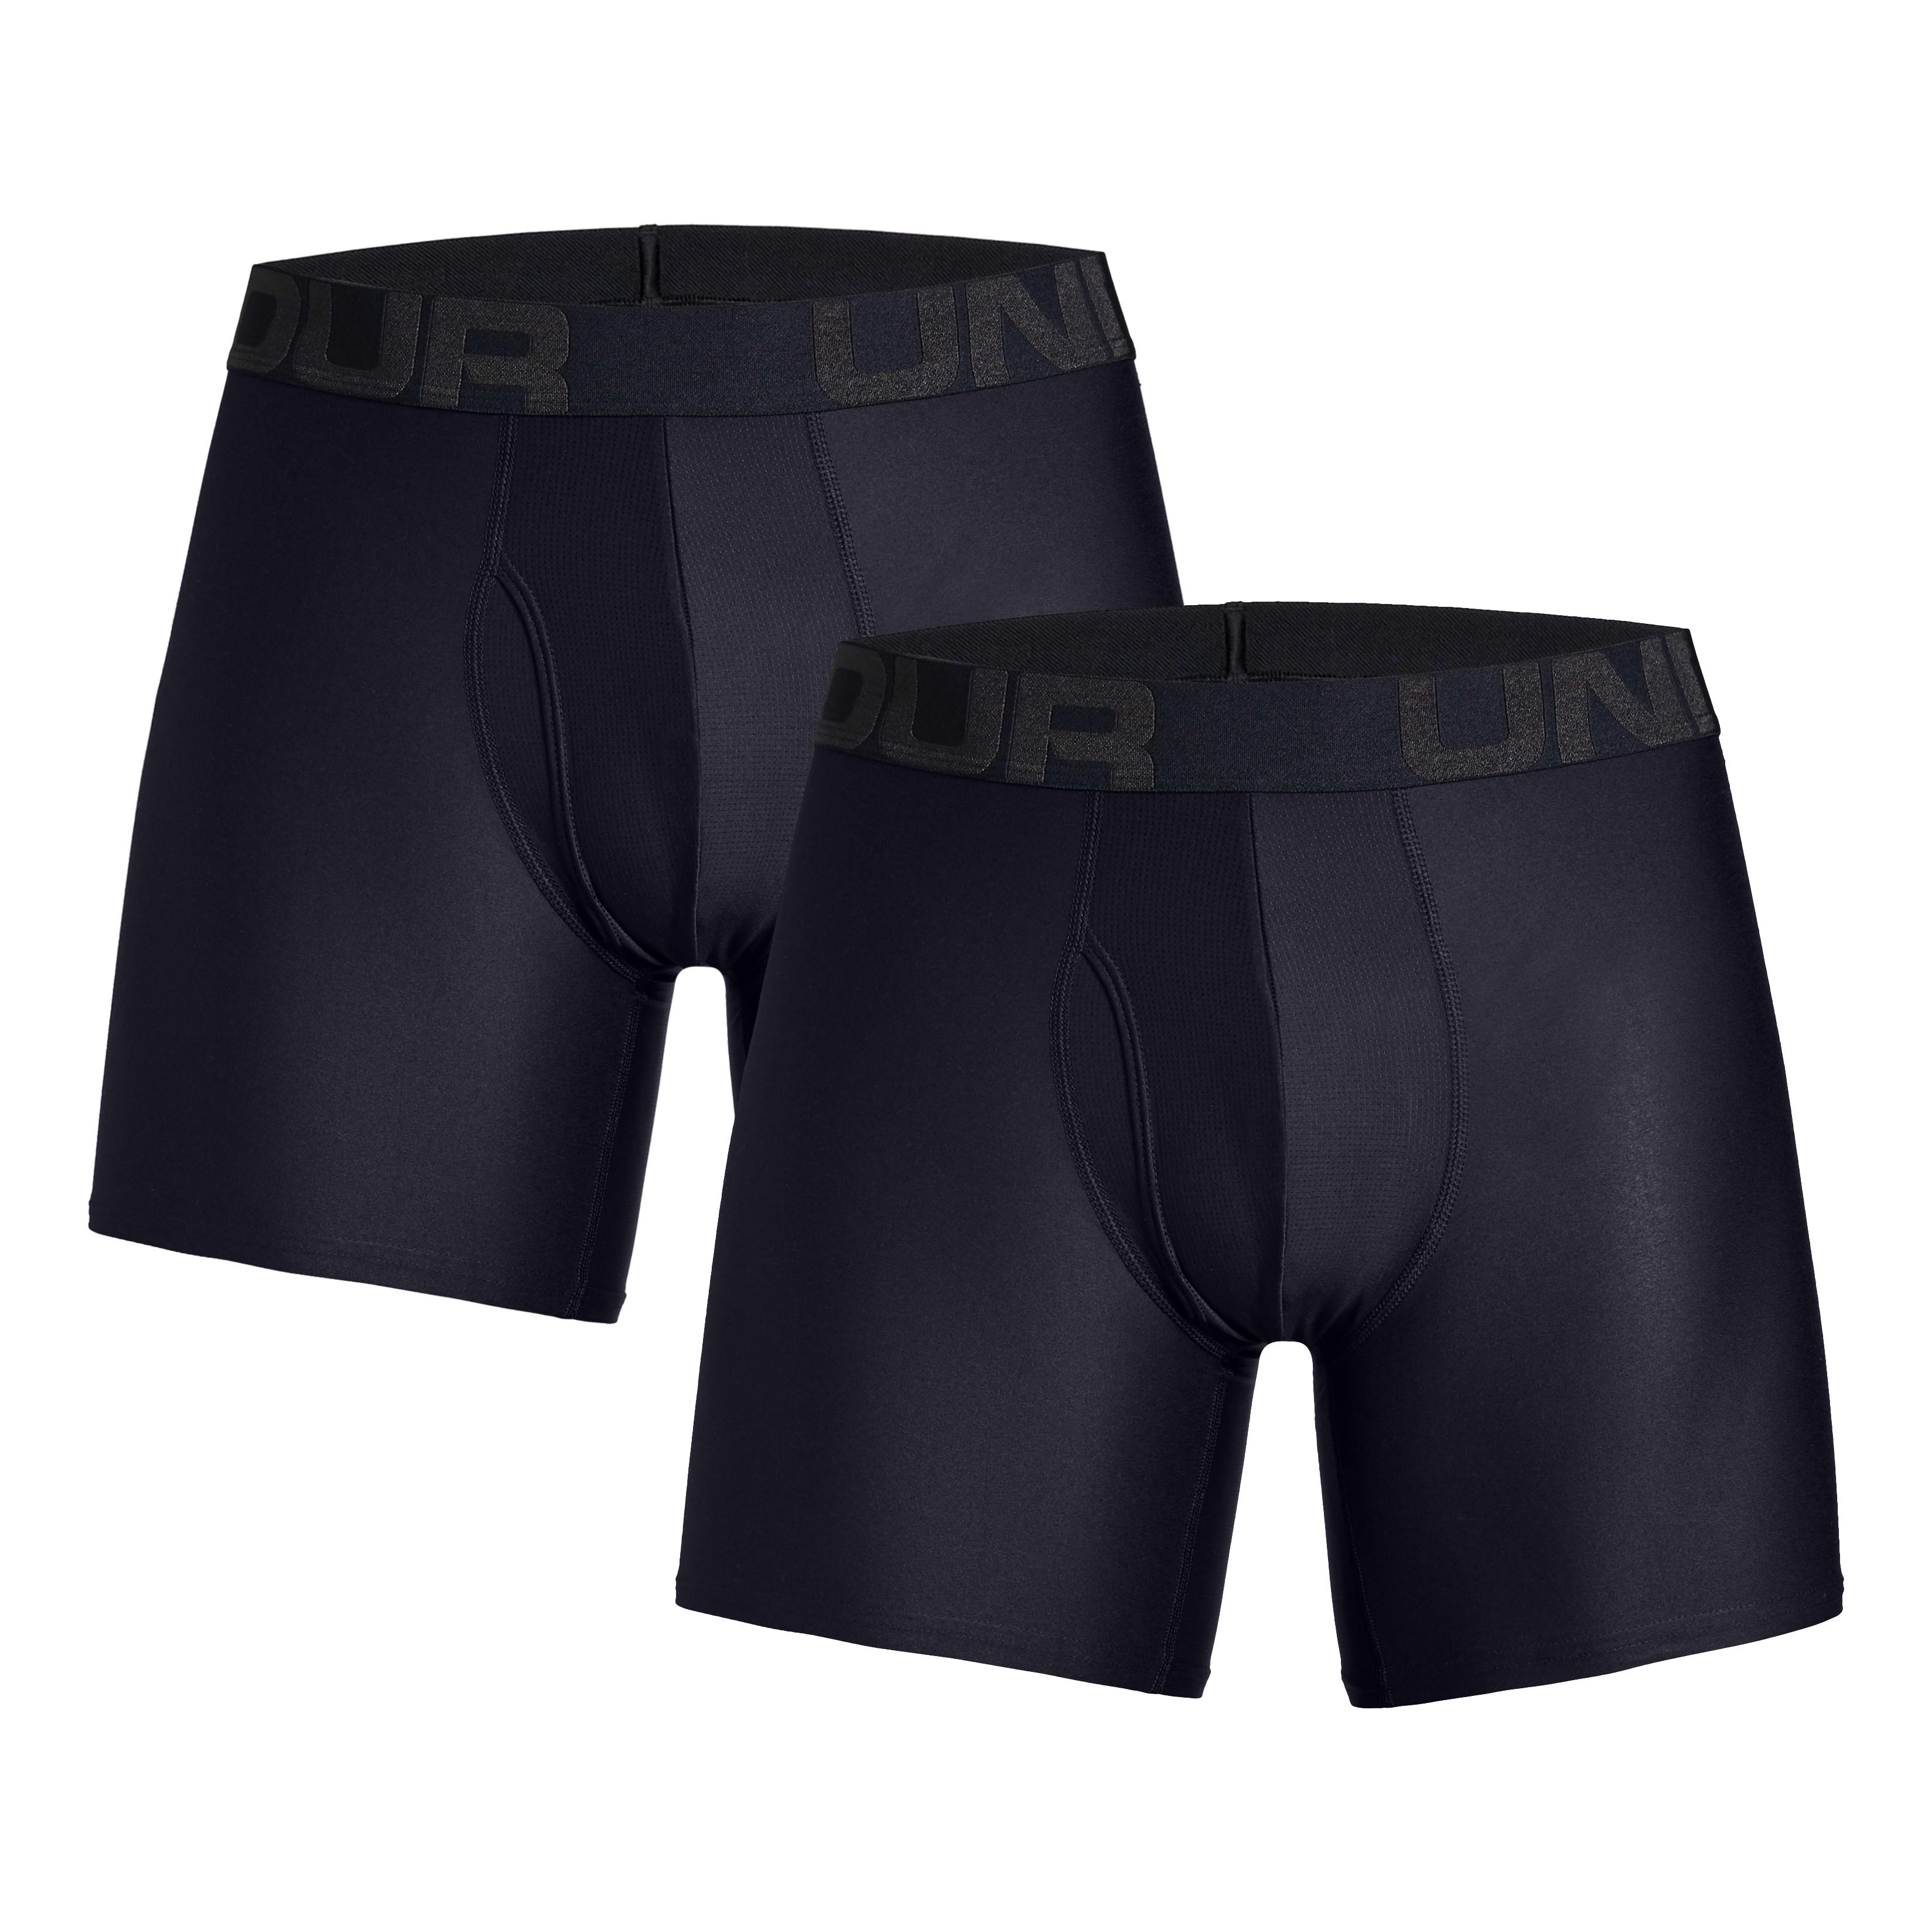 Under Armour Cotton Stretch 6 Boxerjock 3-Pack Black/White/Red 1277279-004  - Free Shipping at LASC